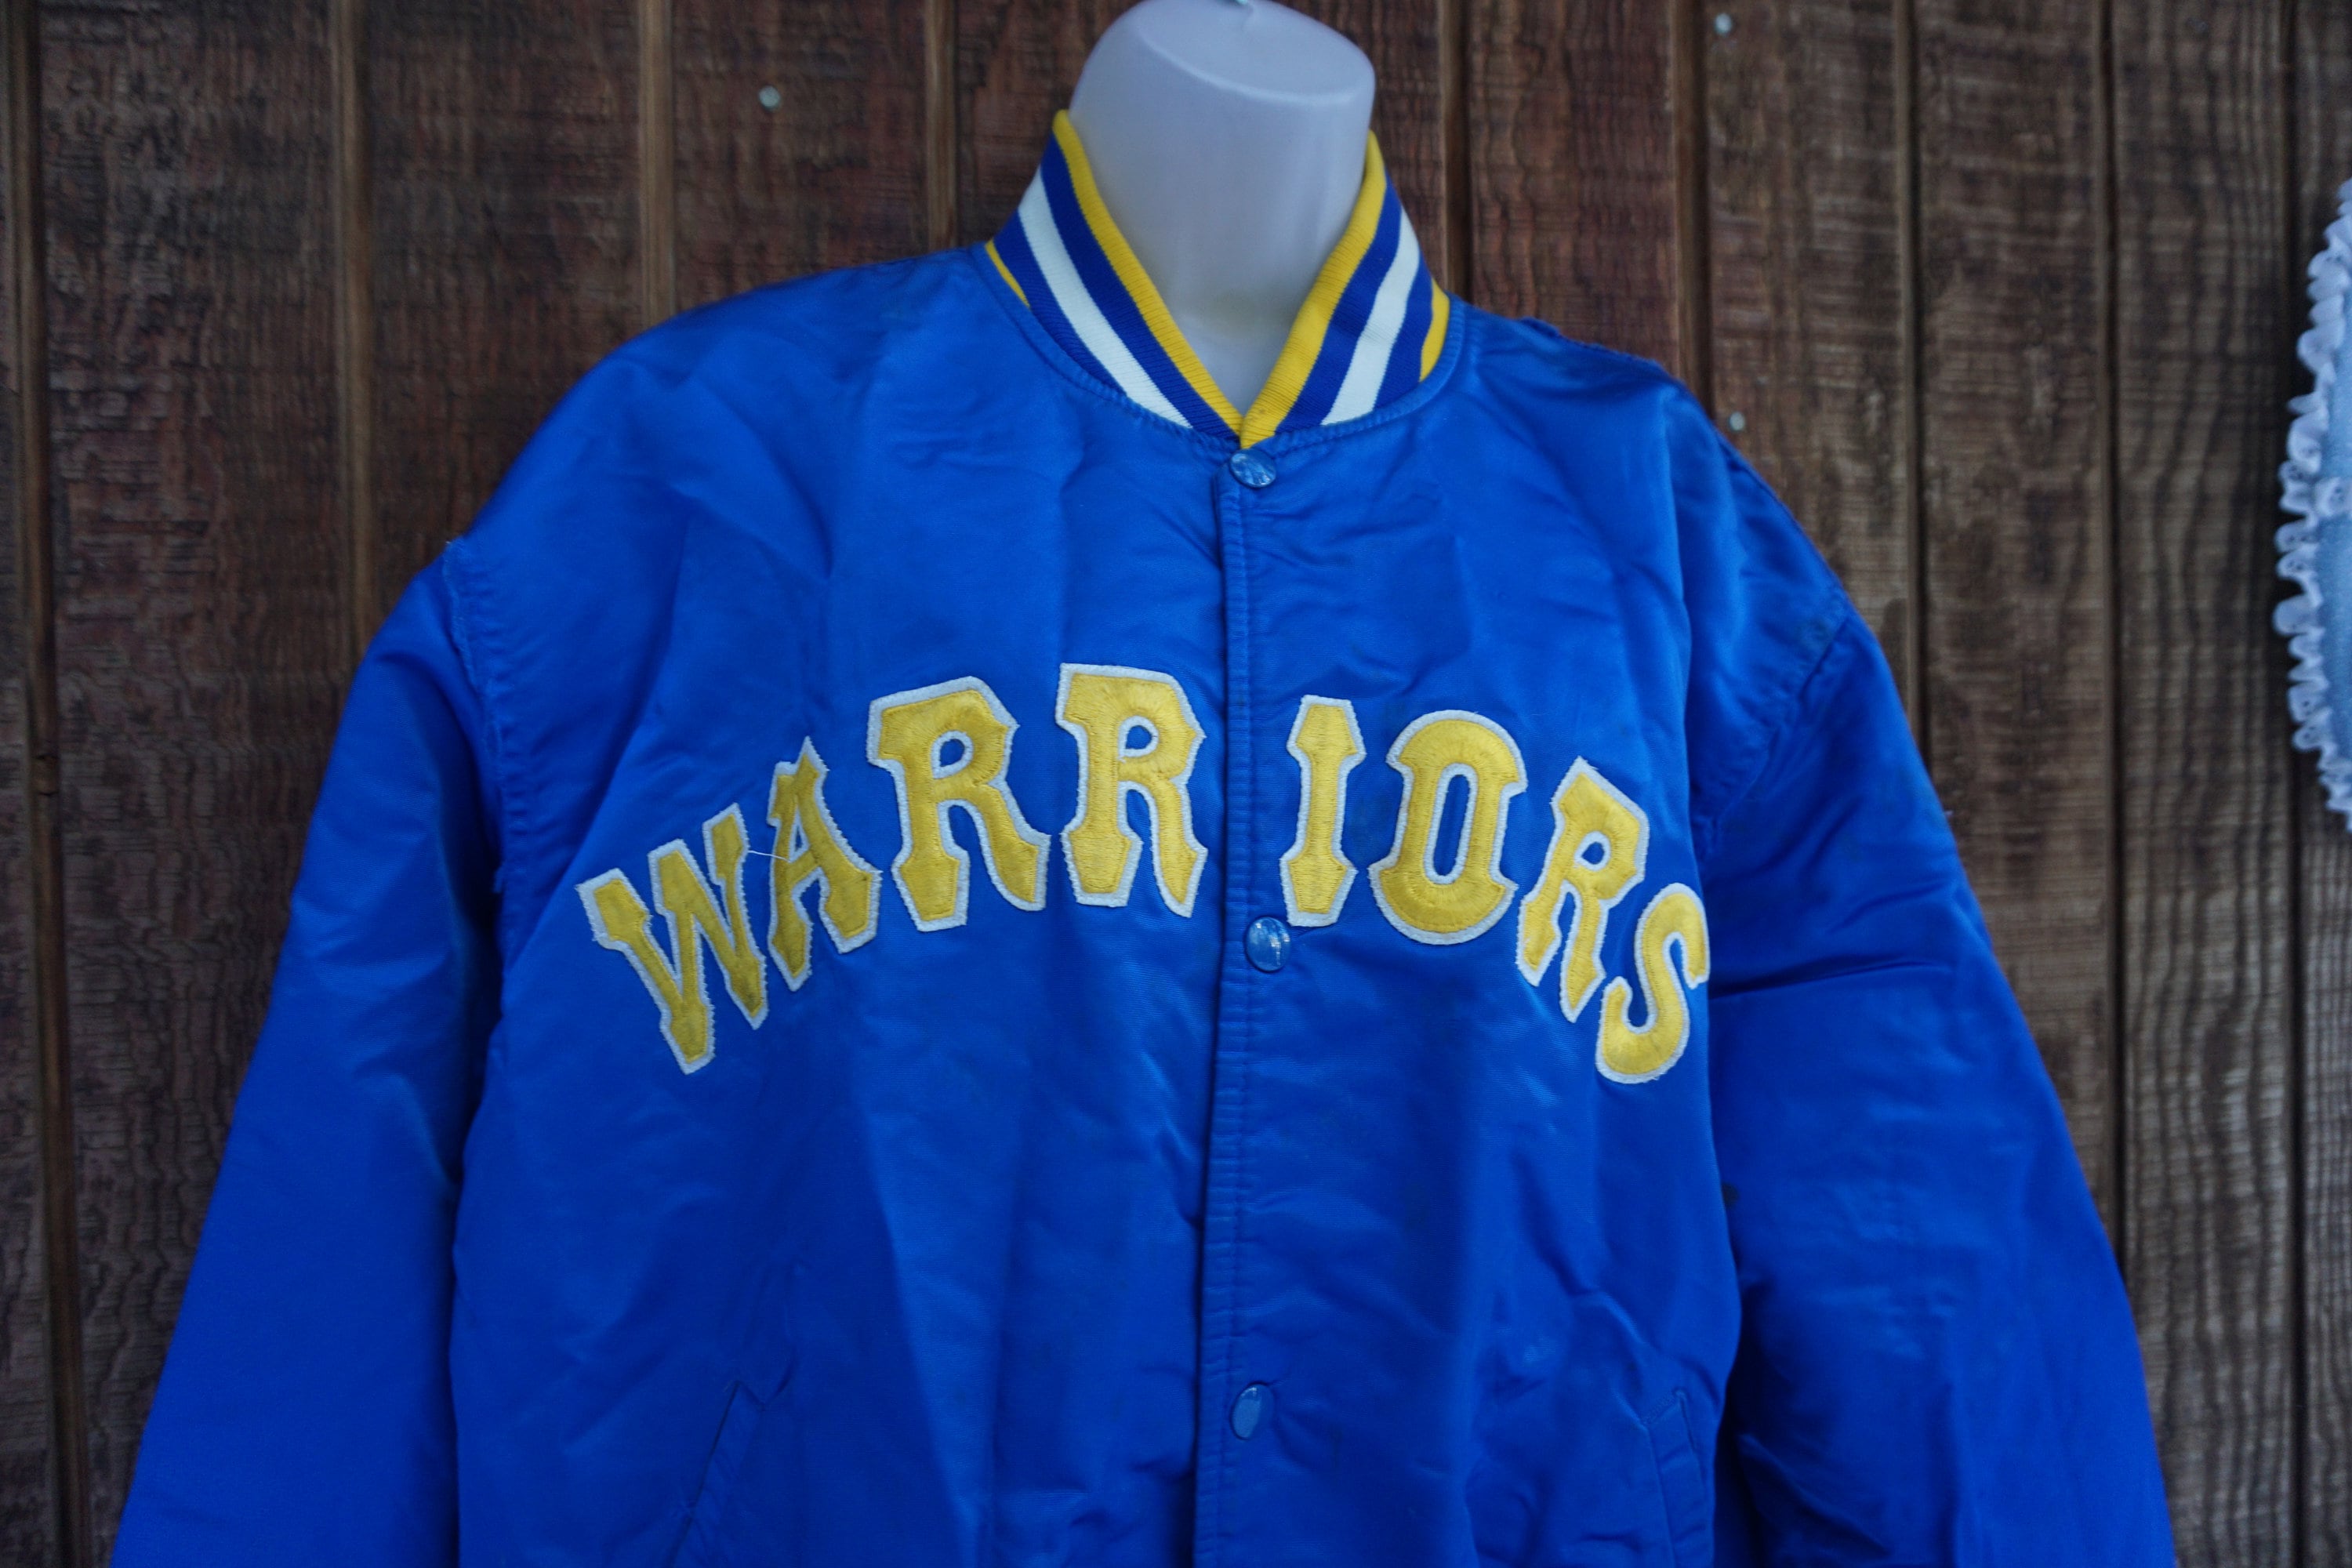 WE BELIEVE Golden State Warriors Jacket Size Large Steph Curry Authentic  Golden State Warrior…